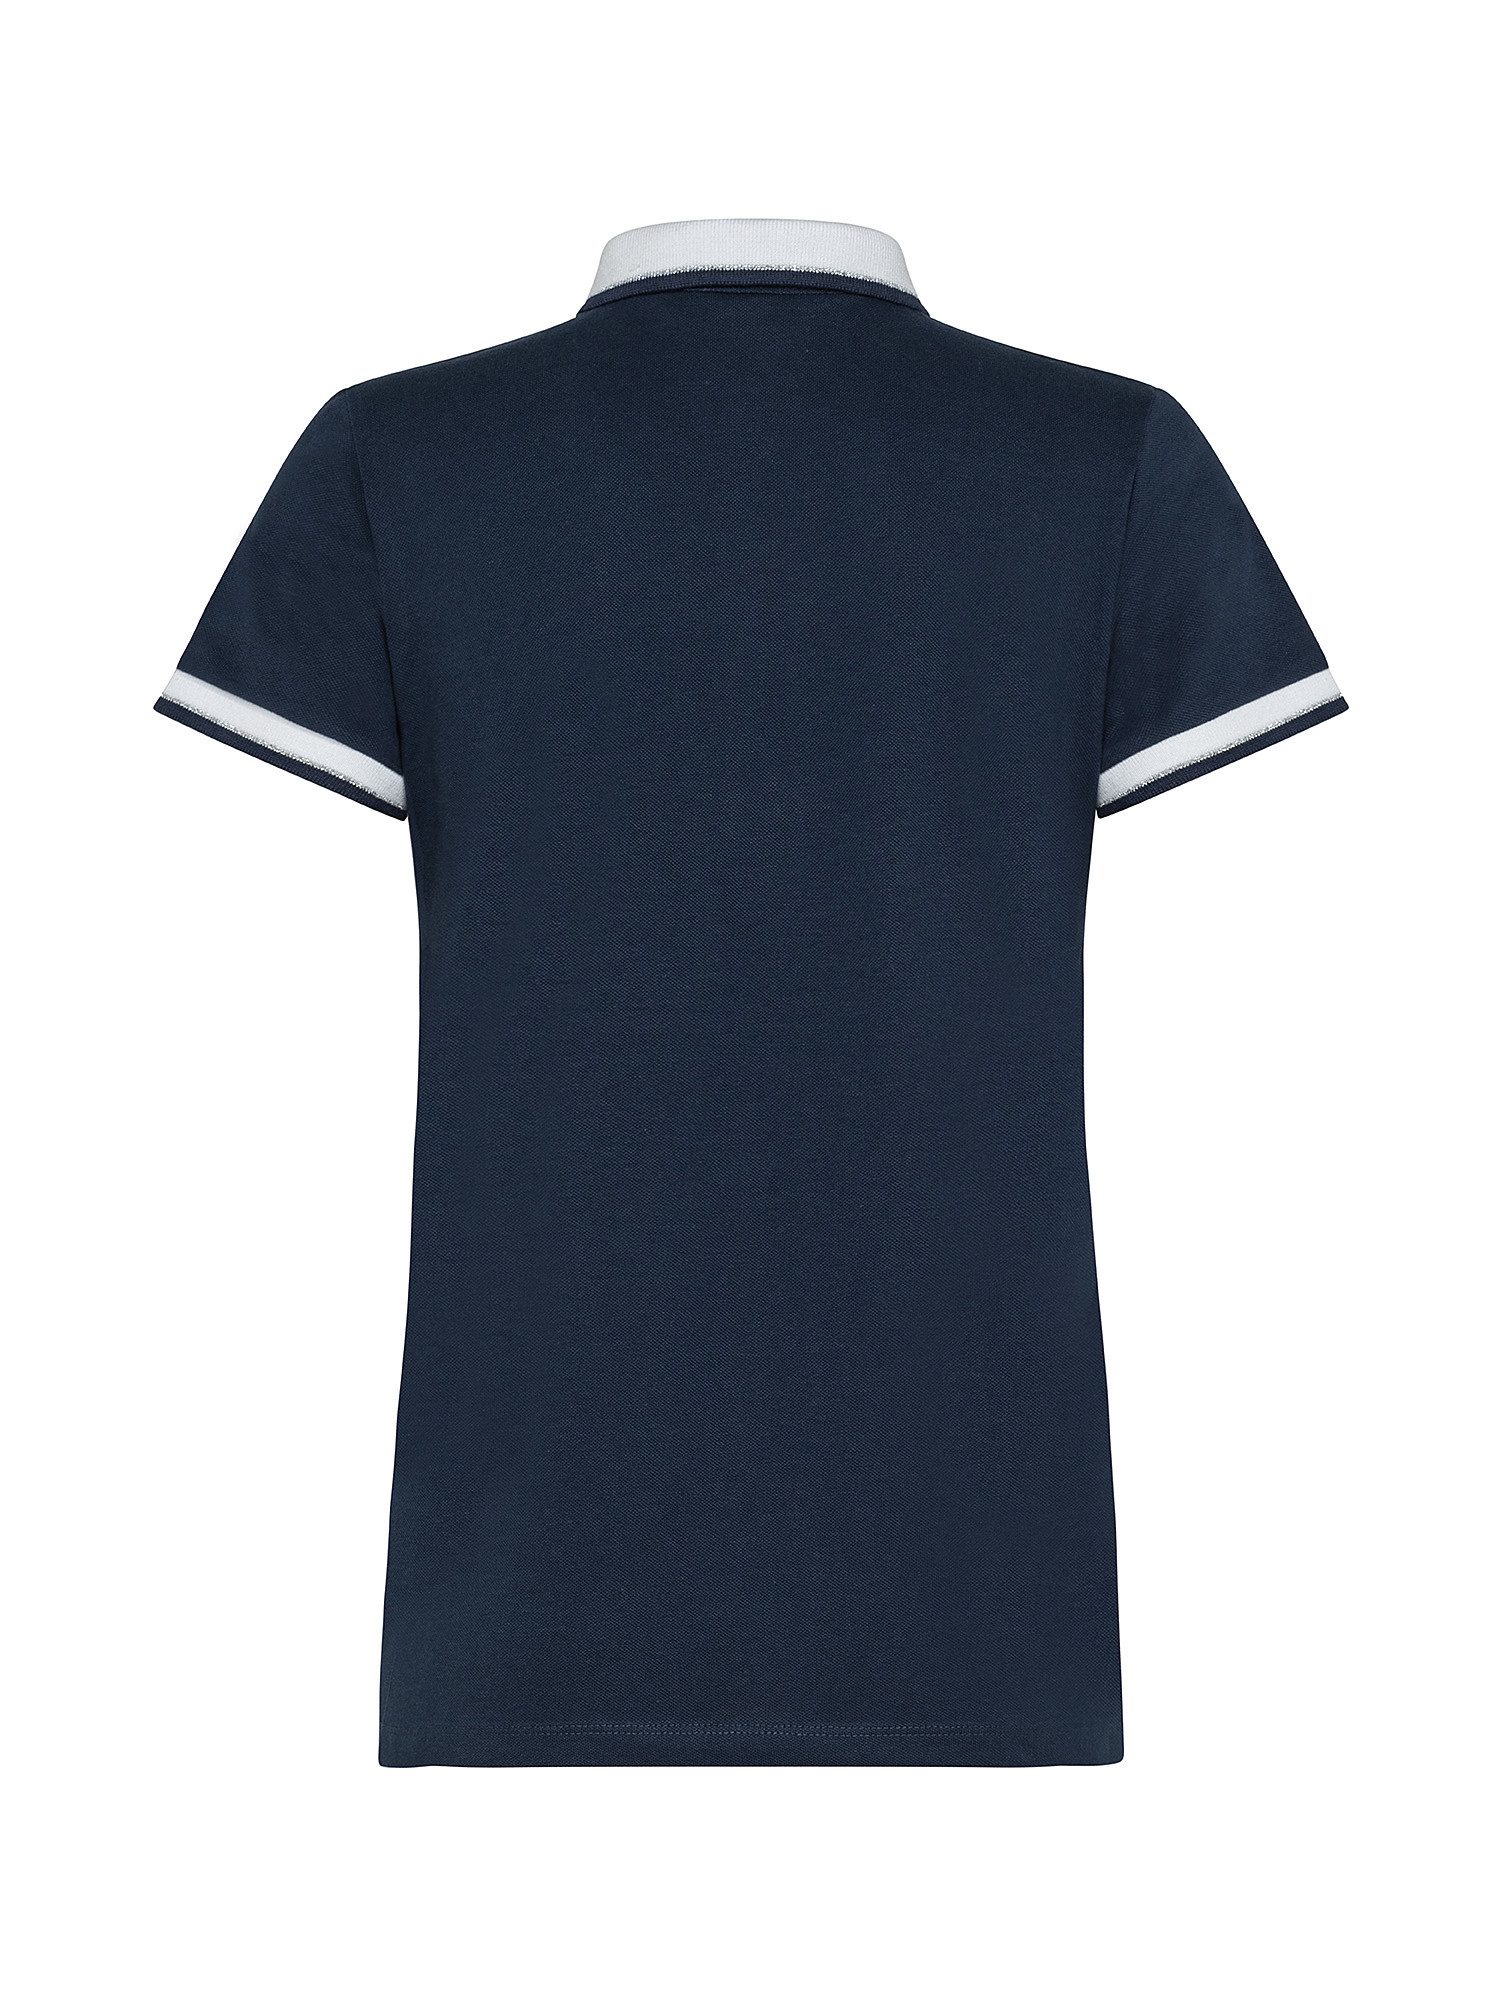 Polo shirt with lurex details, Blue, large image number 1